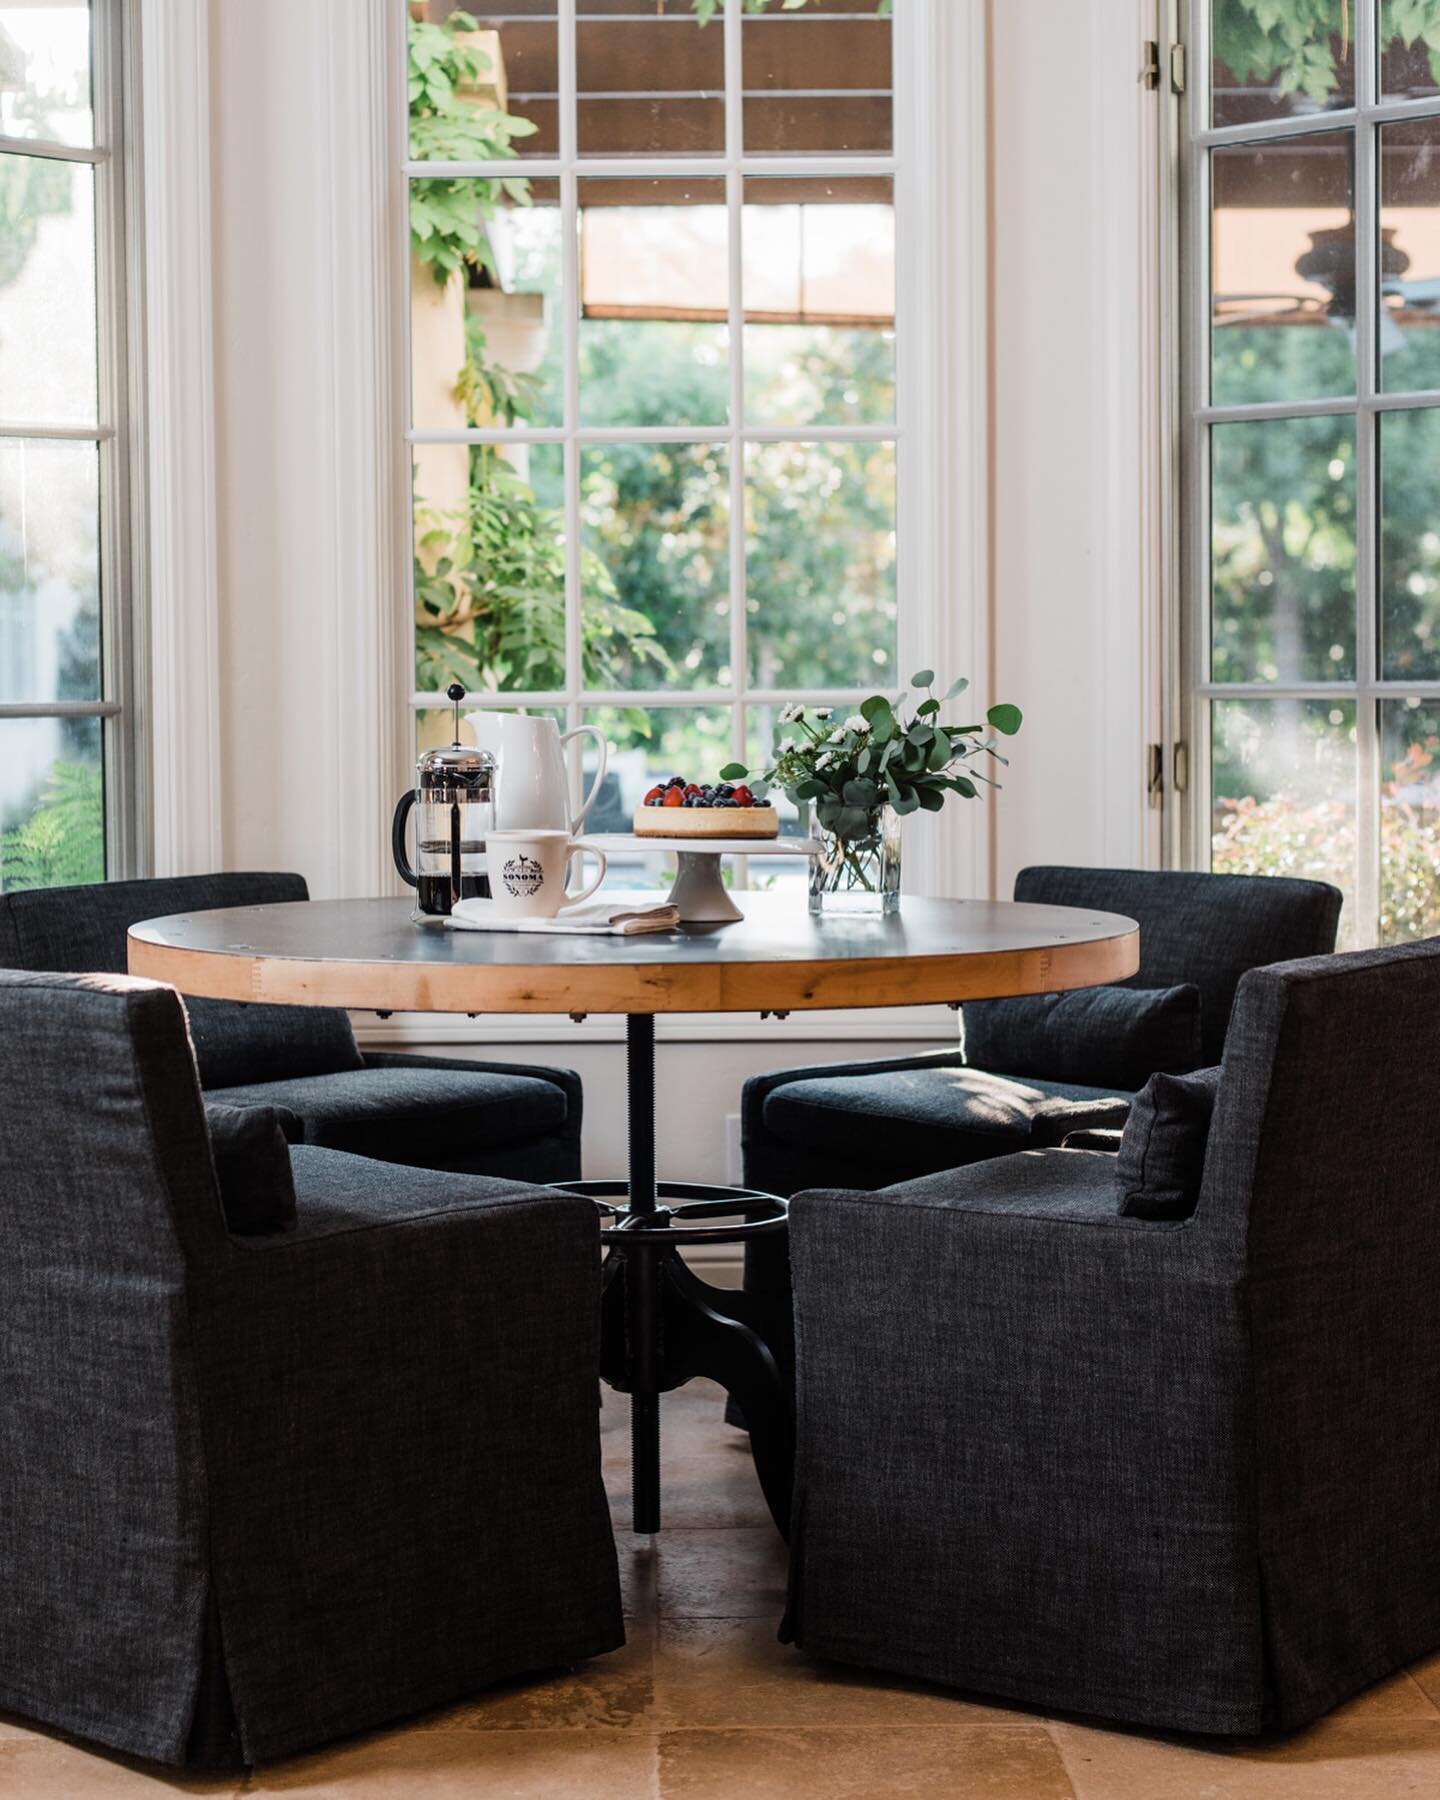 With dining chairs like these, we may spend all day here. #Wednesday ⠀
⠀
Photographer: @rebeccagosselinphotography ⠀
#FletcherRhodes #FRstyle #InteriorDesign #WineCountryStyle #SonomaEastsideManor